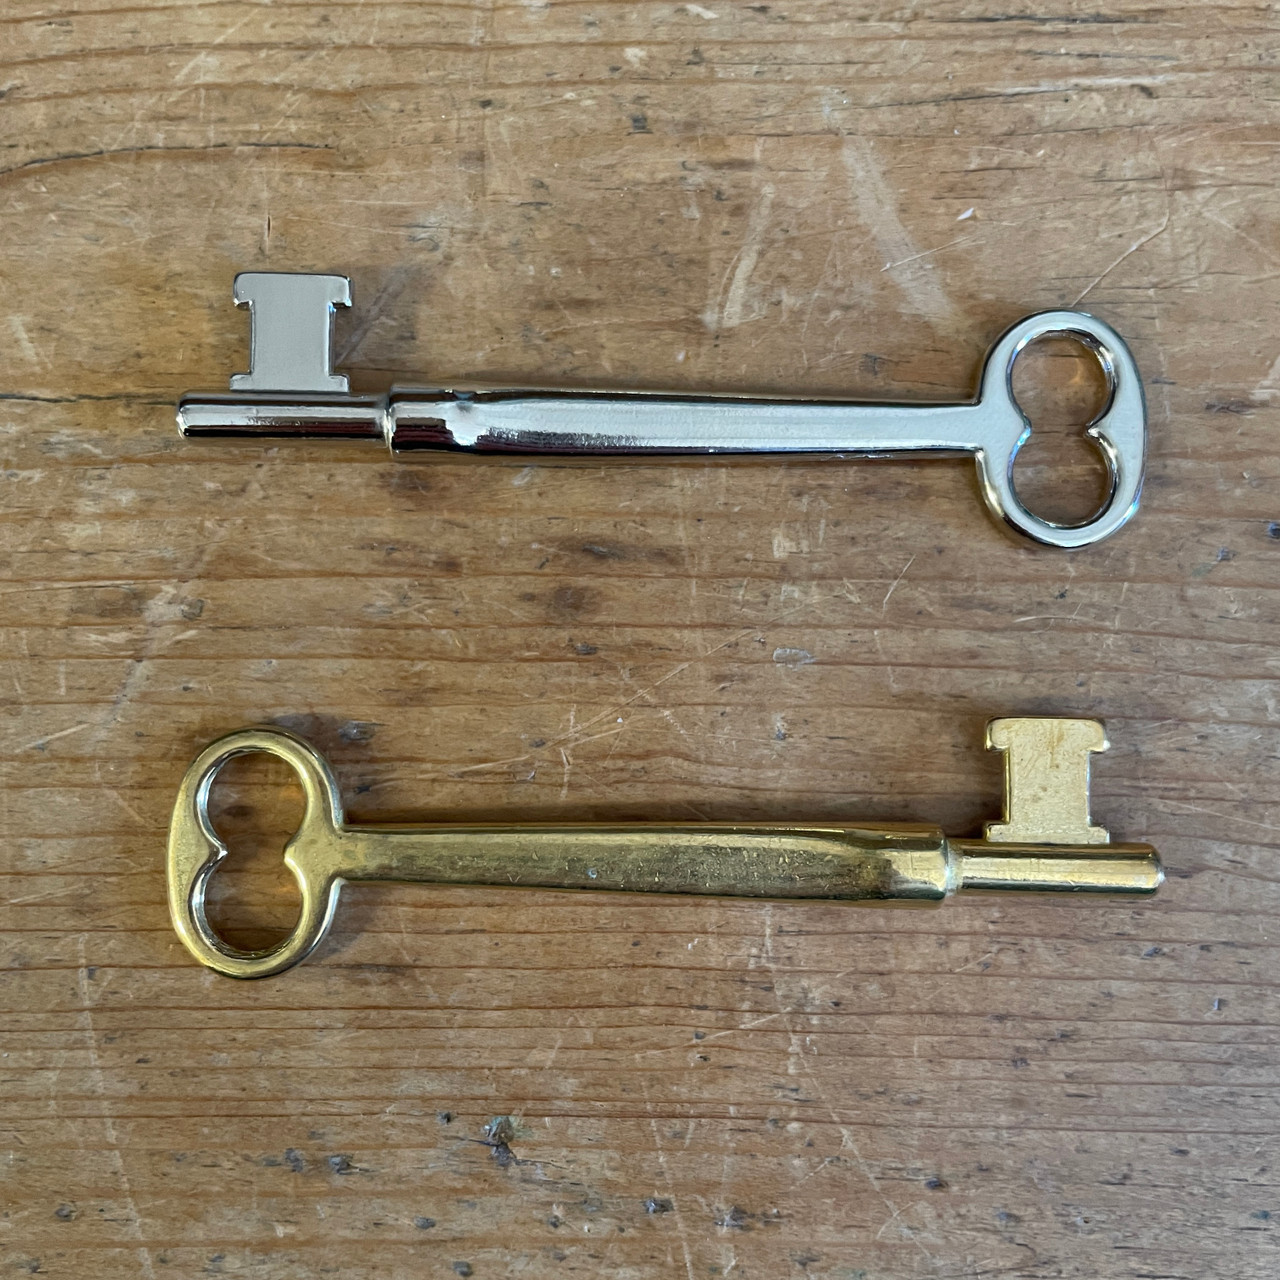 8 Vtg Flat Skeleton Keys In A Variety Of Cuts And Sizes Approx 1.25 -  2.75